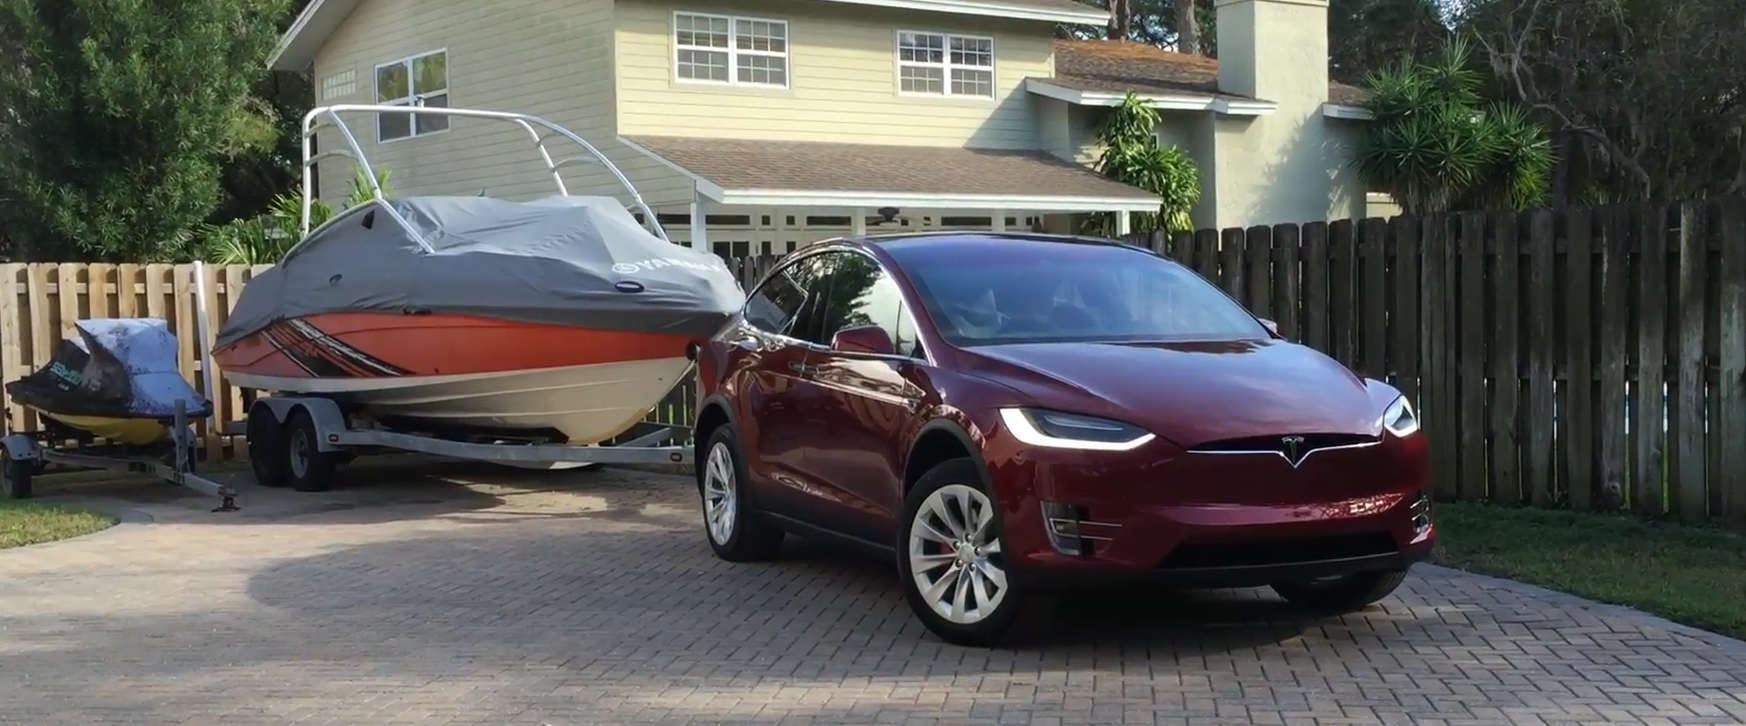 Model X towing a boat - Max Kennedy youtube